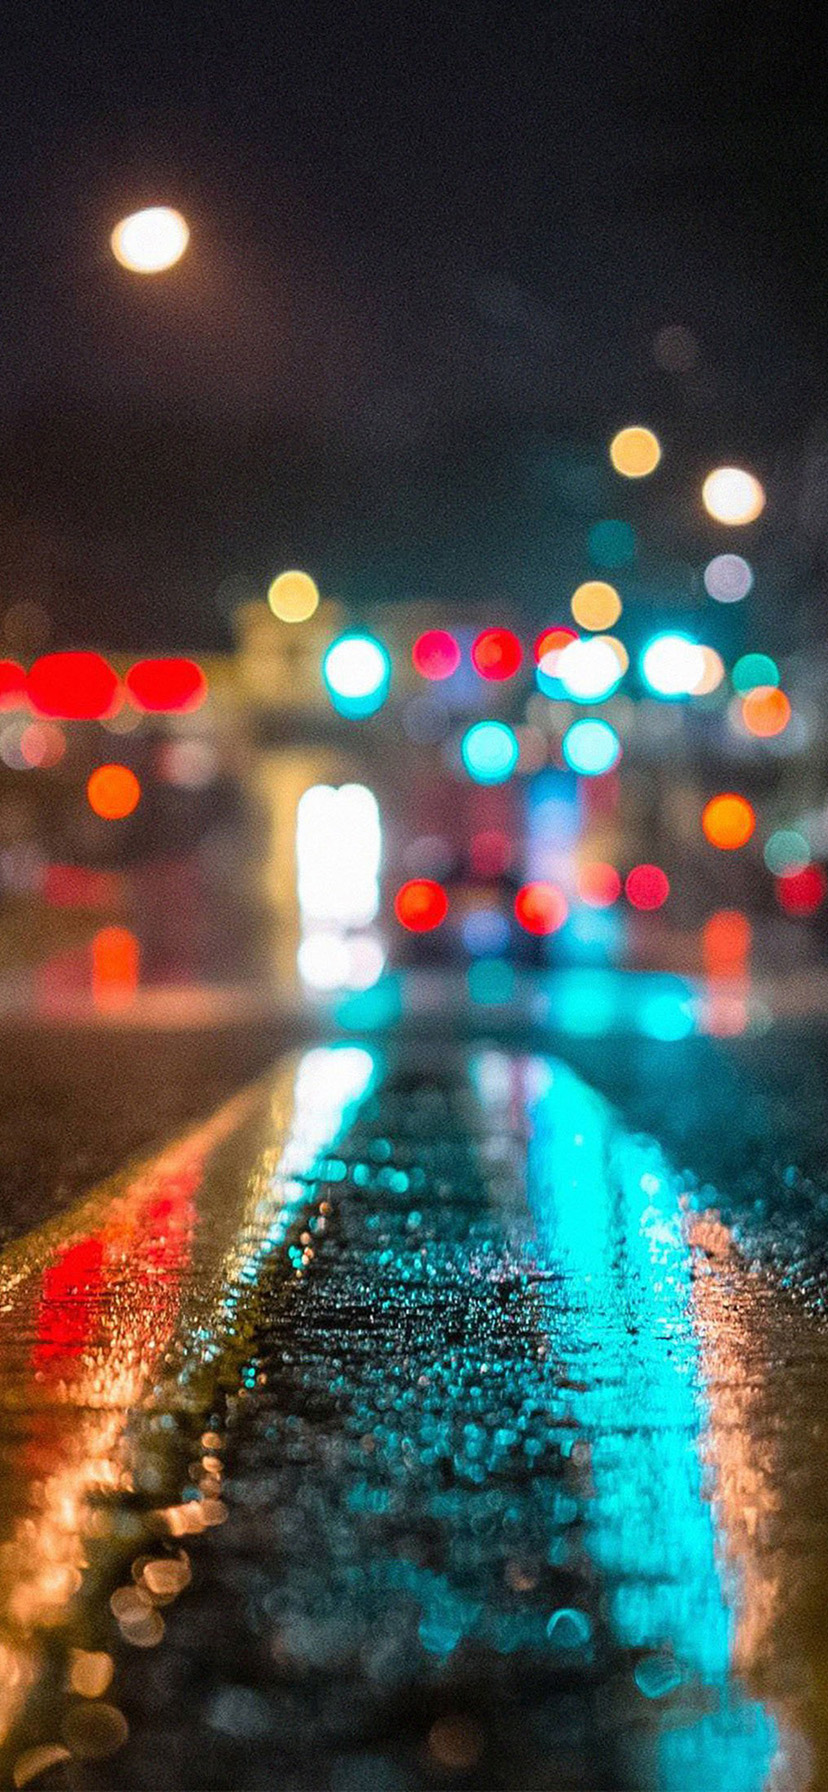 Iphone Xr Wallpapers Download Rainy City Nature - City Lights Background Portrait - HD Wallpaper 